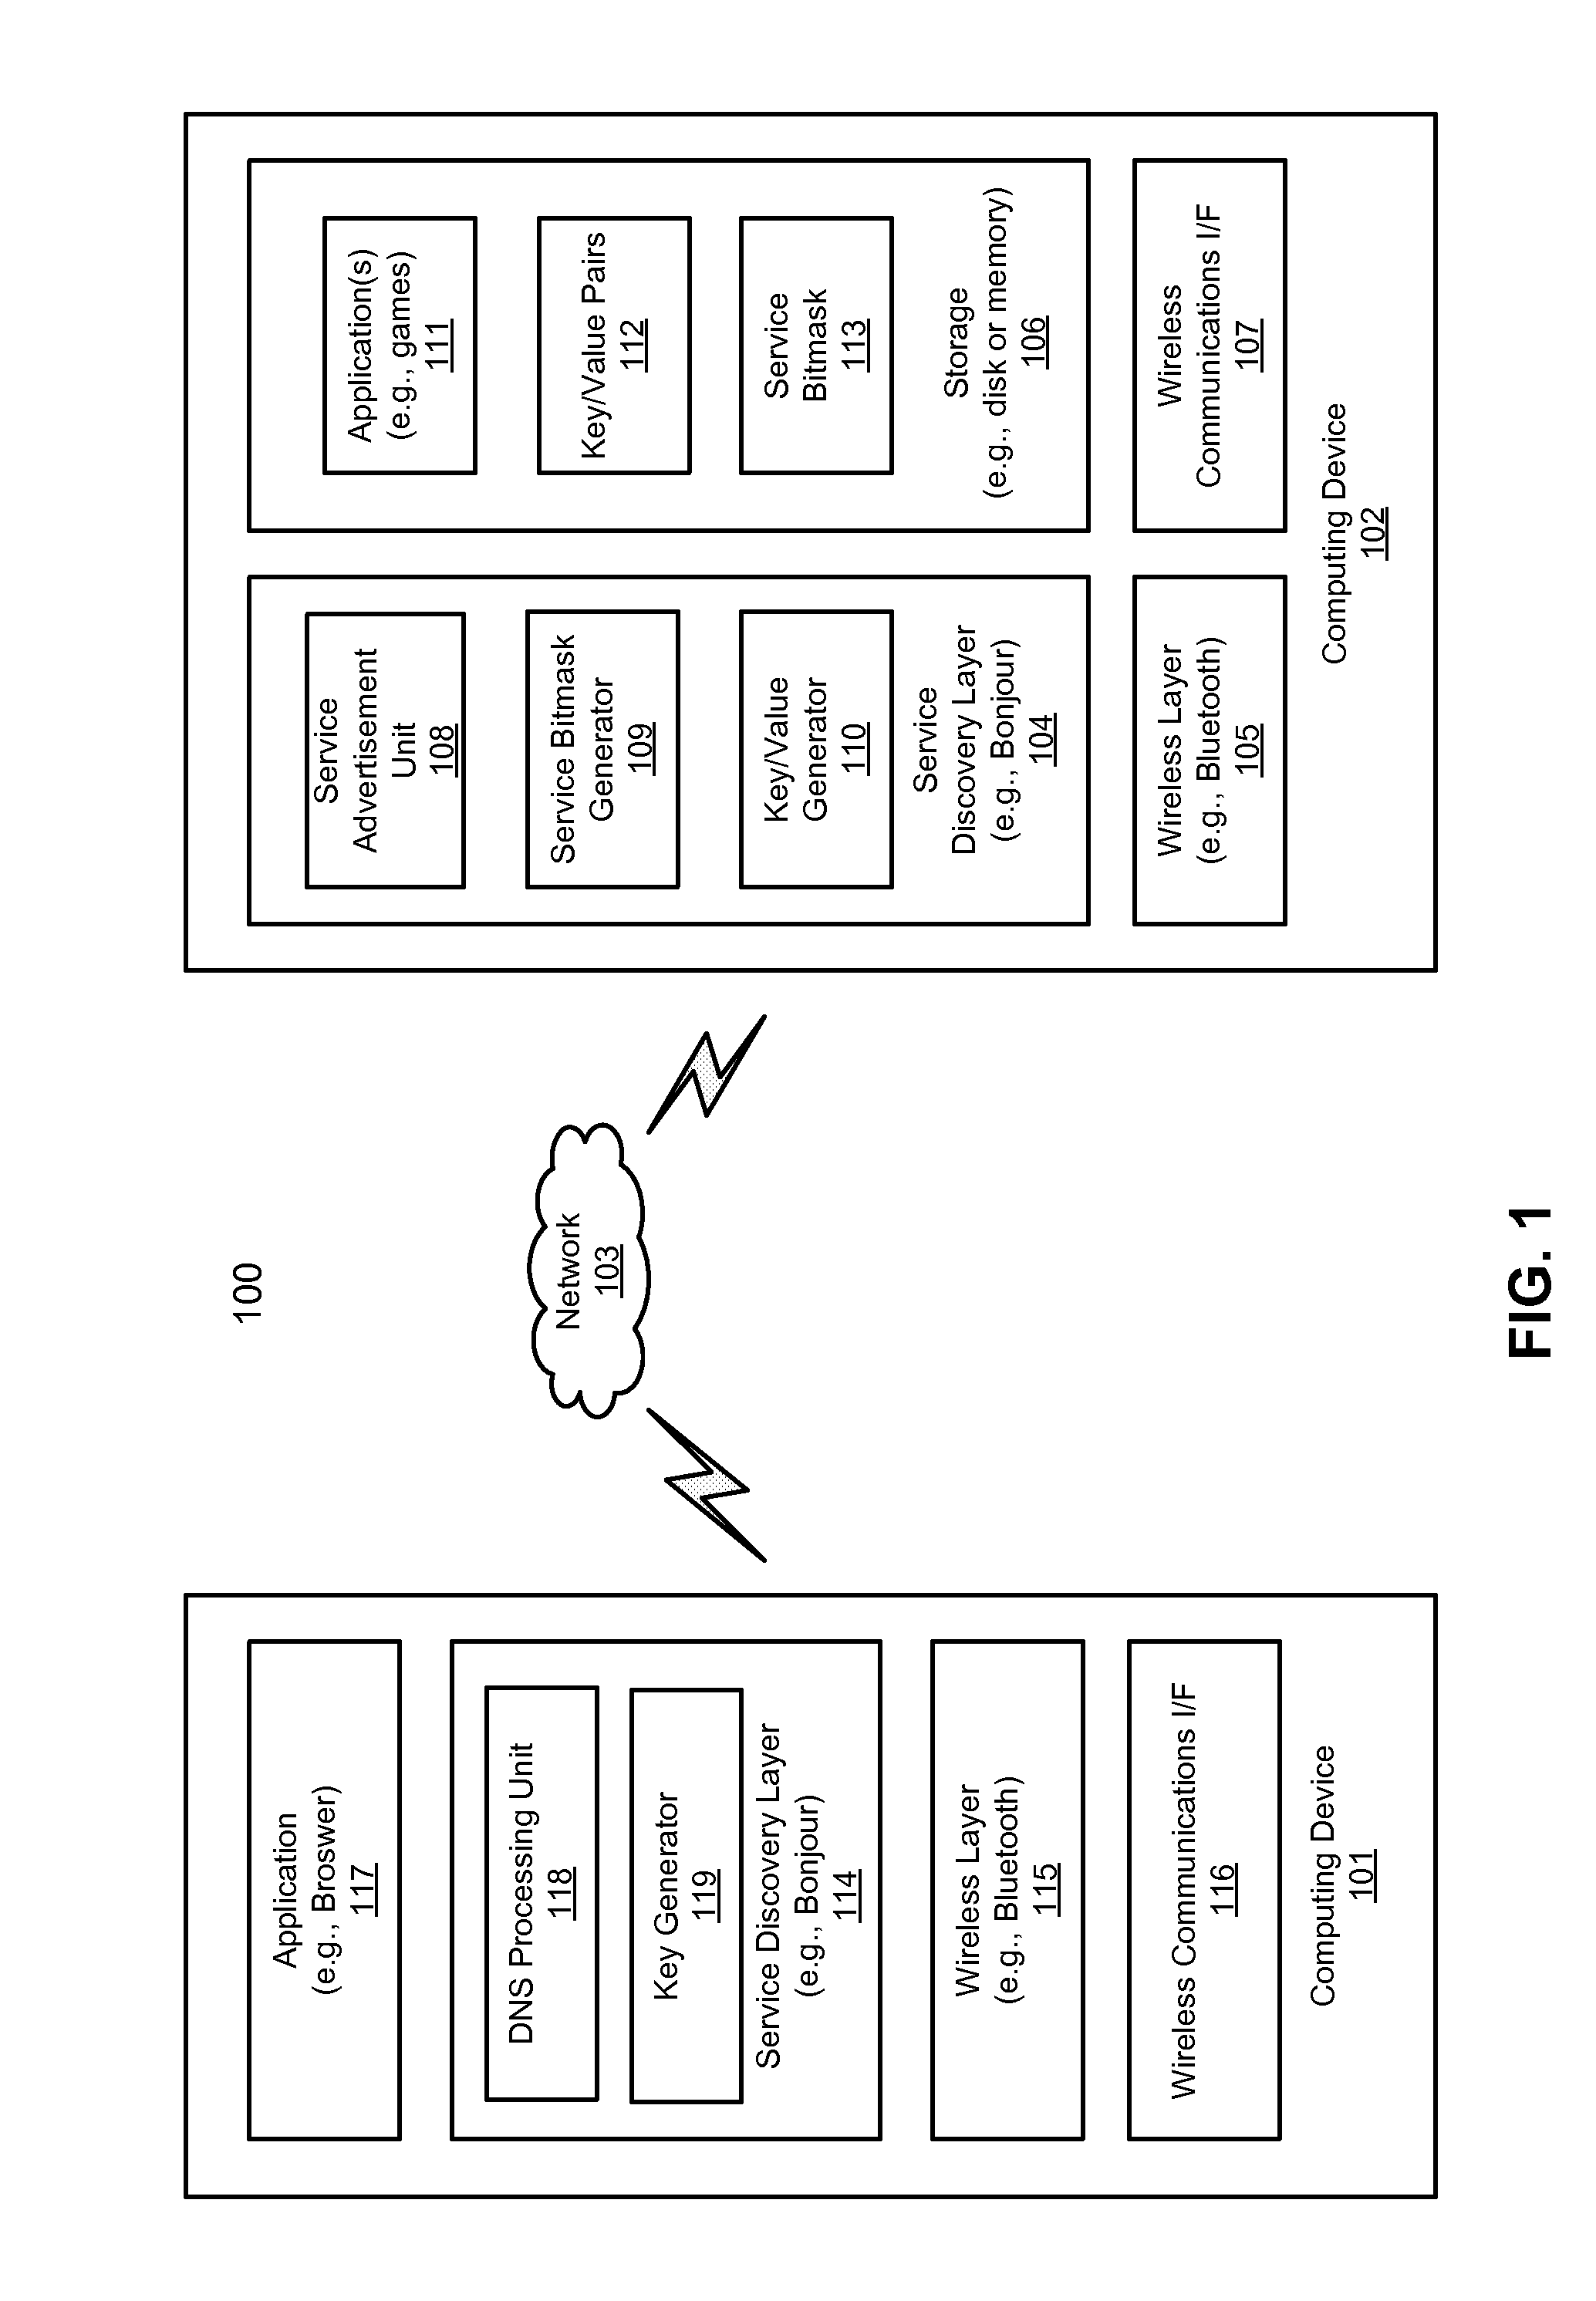 Efficient service discovery for peer-to-peer networking devices